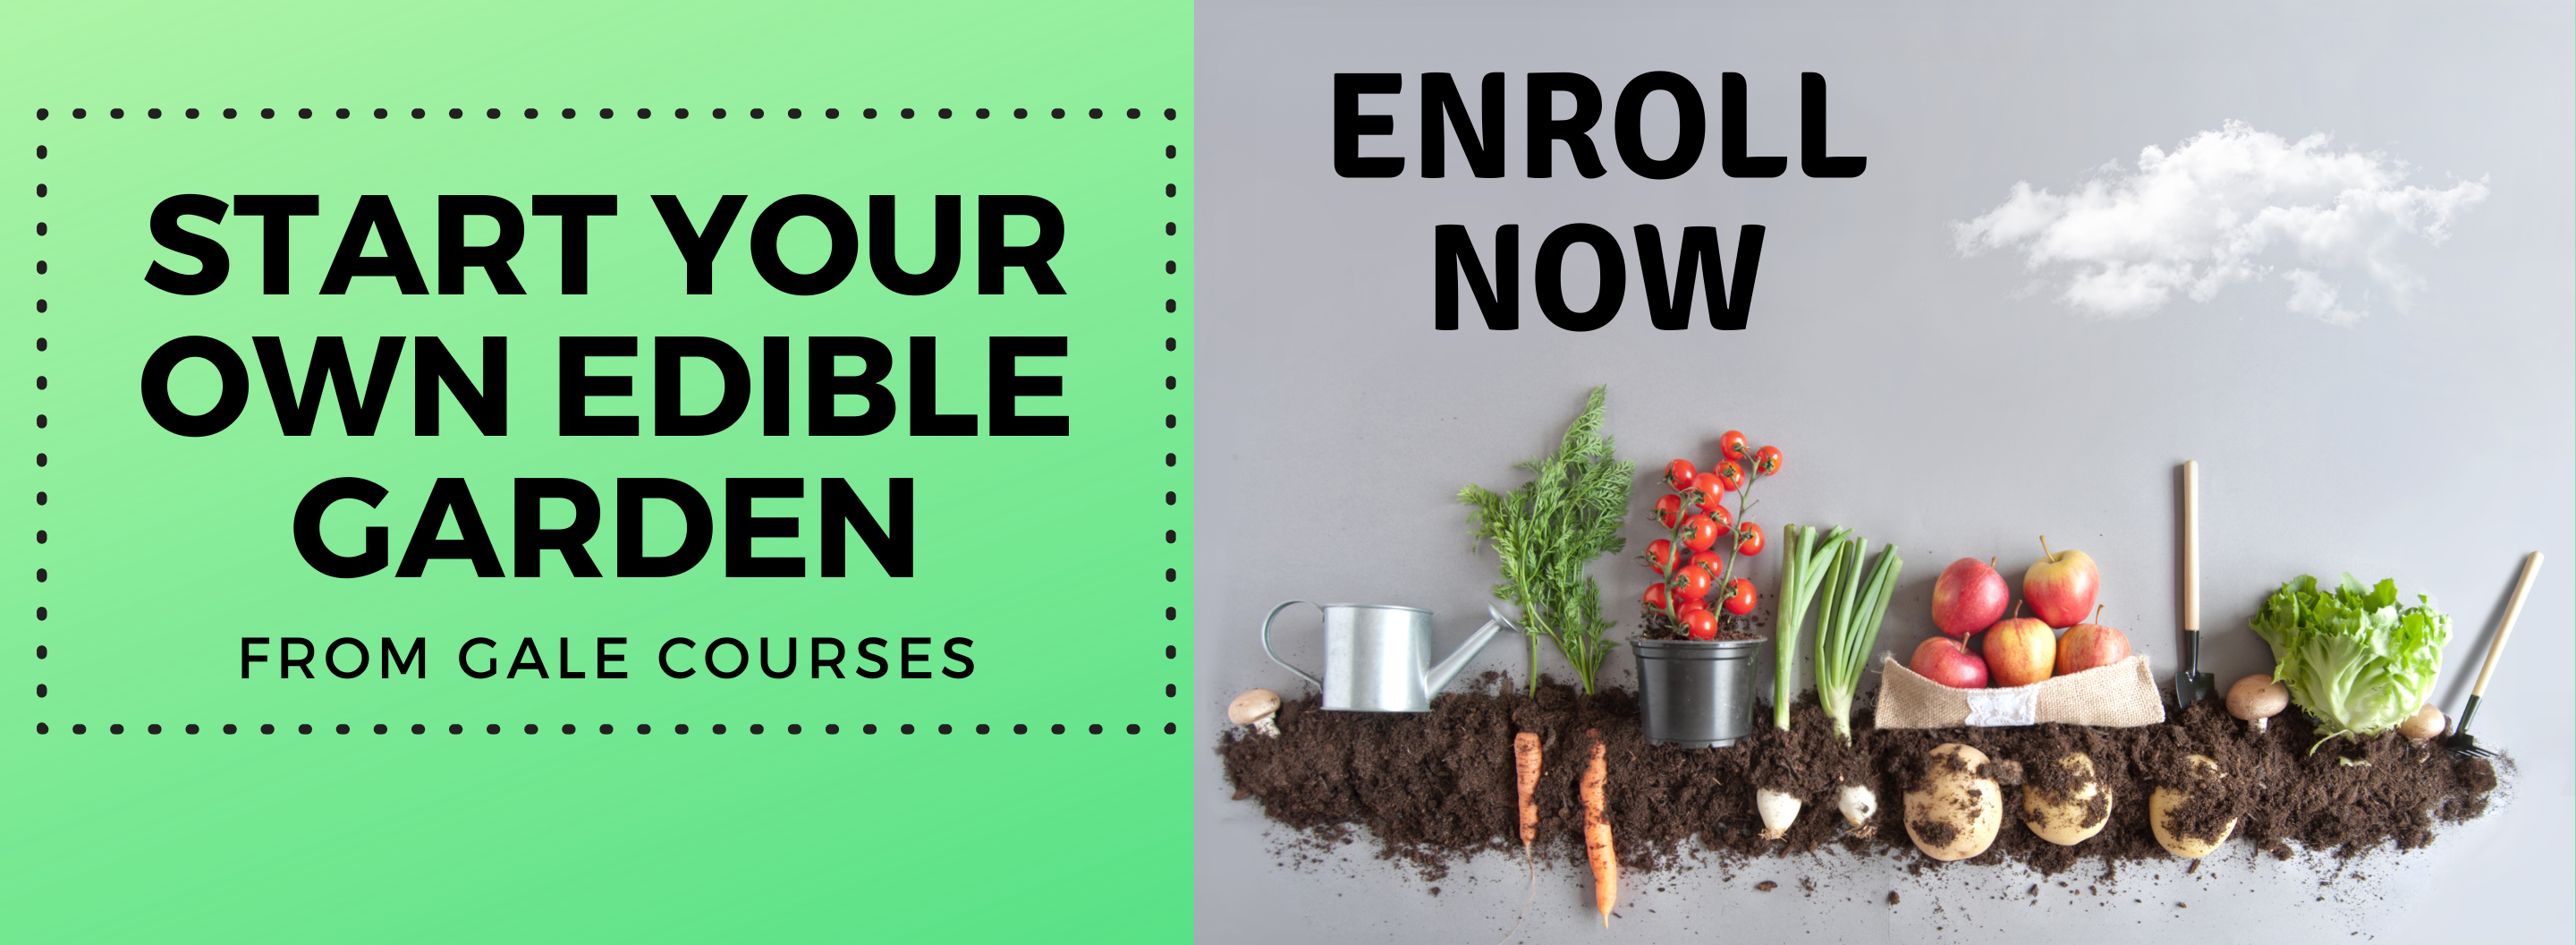 slideshow image that says "Start your own edible garden from Gale Courses. Enroll now". There is a stylized image of soil and vegetables laid flat to simulate a growing garden. 